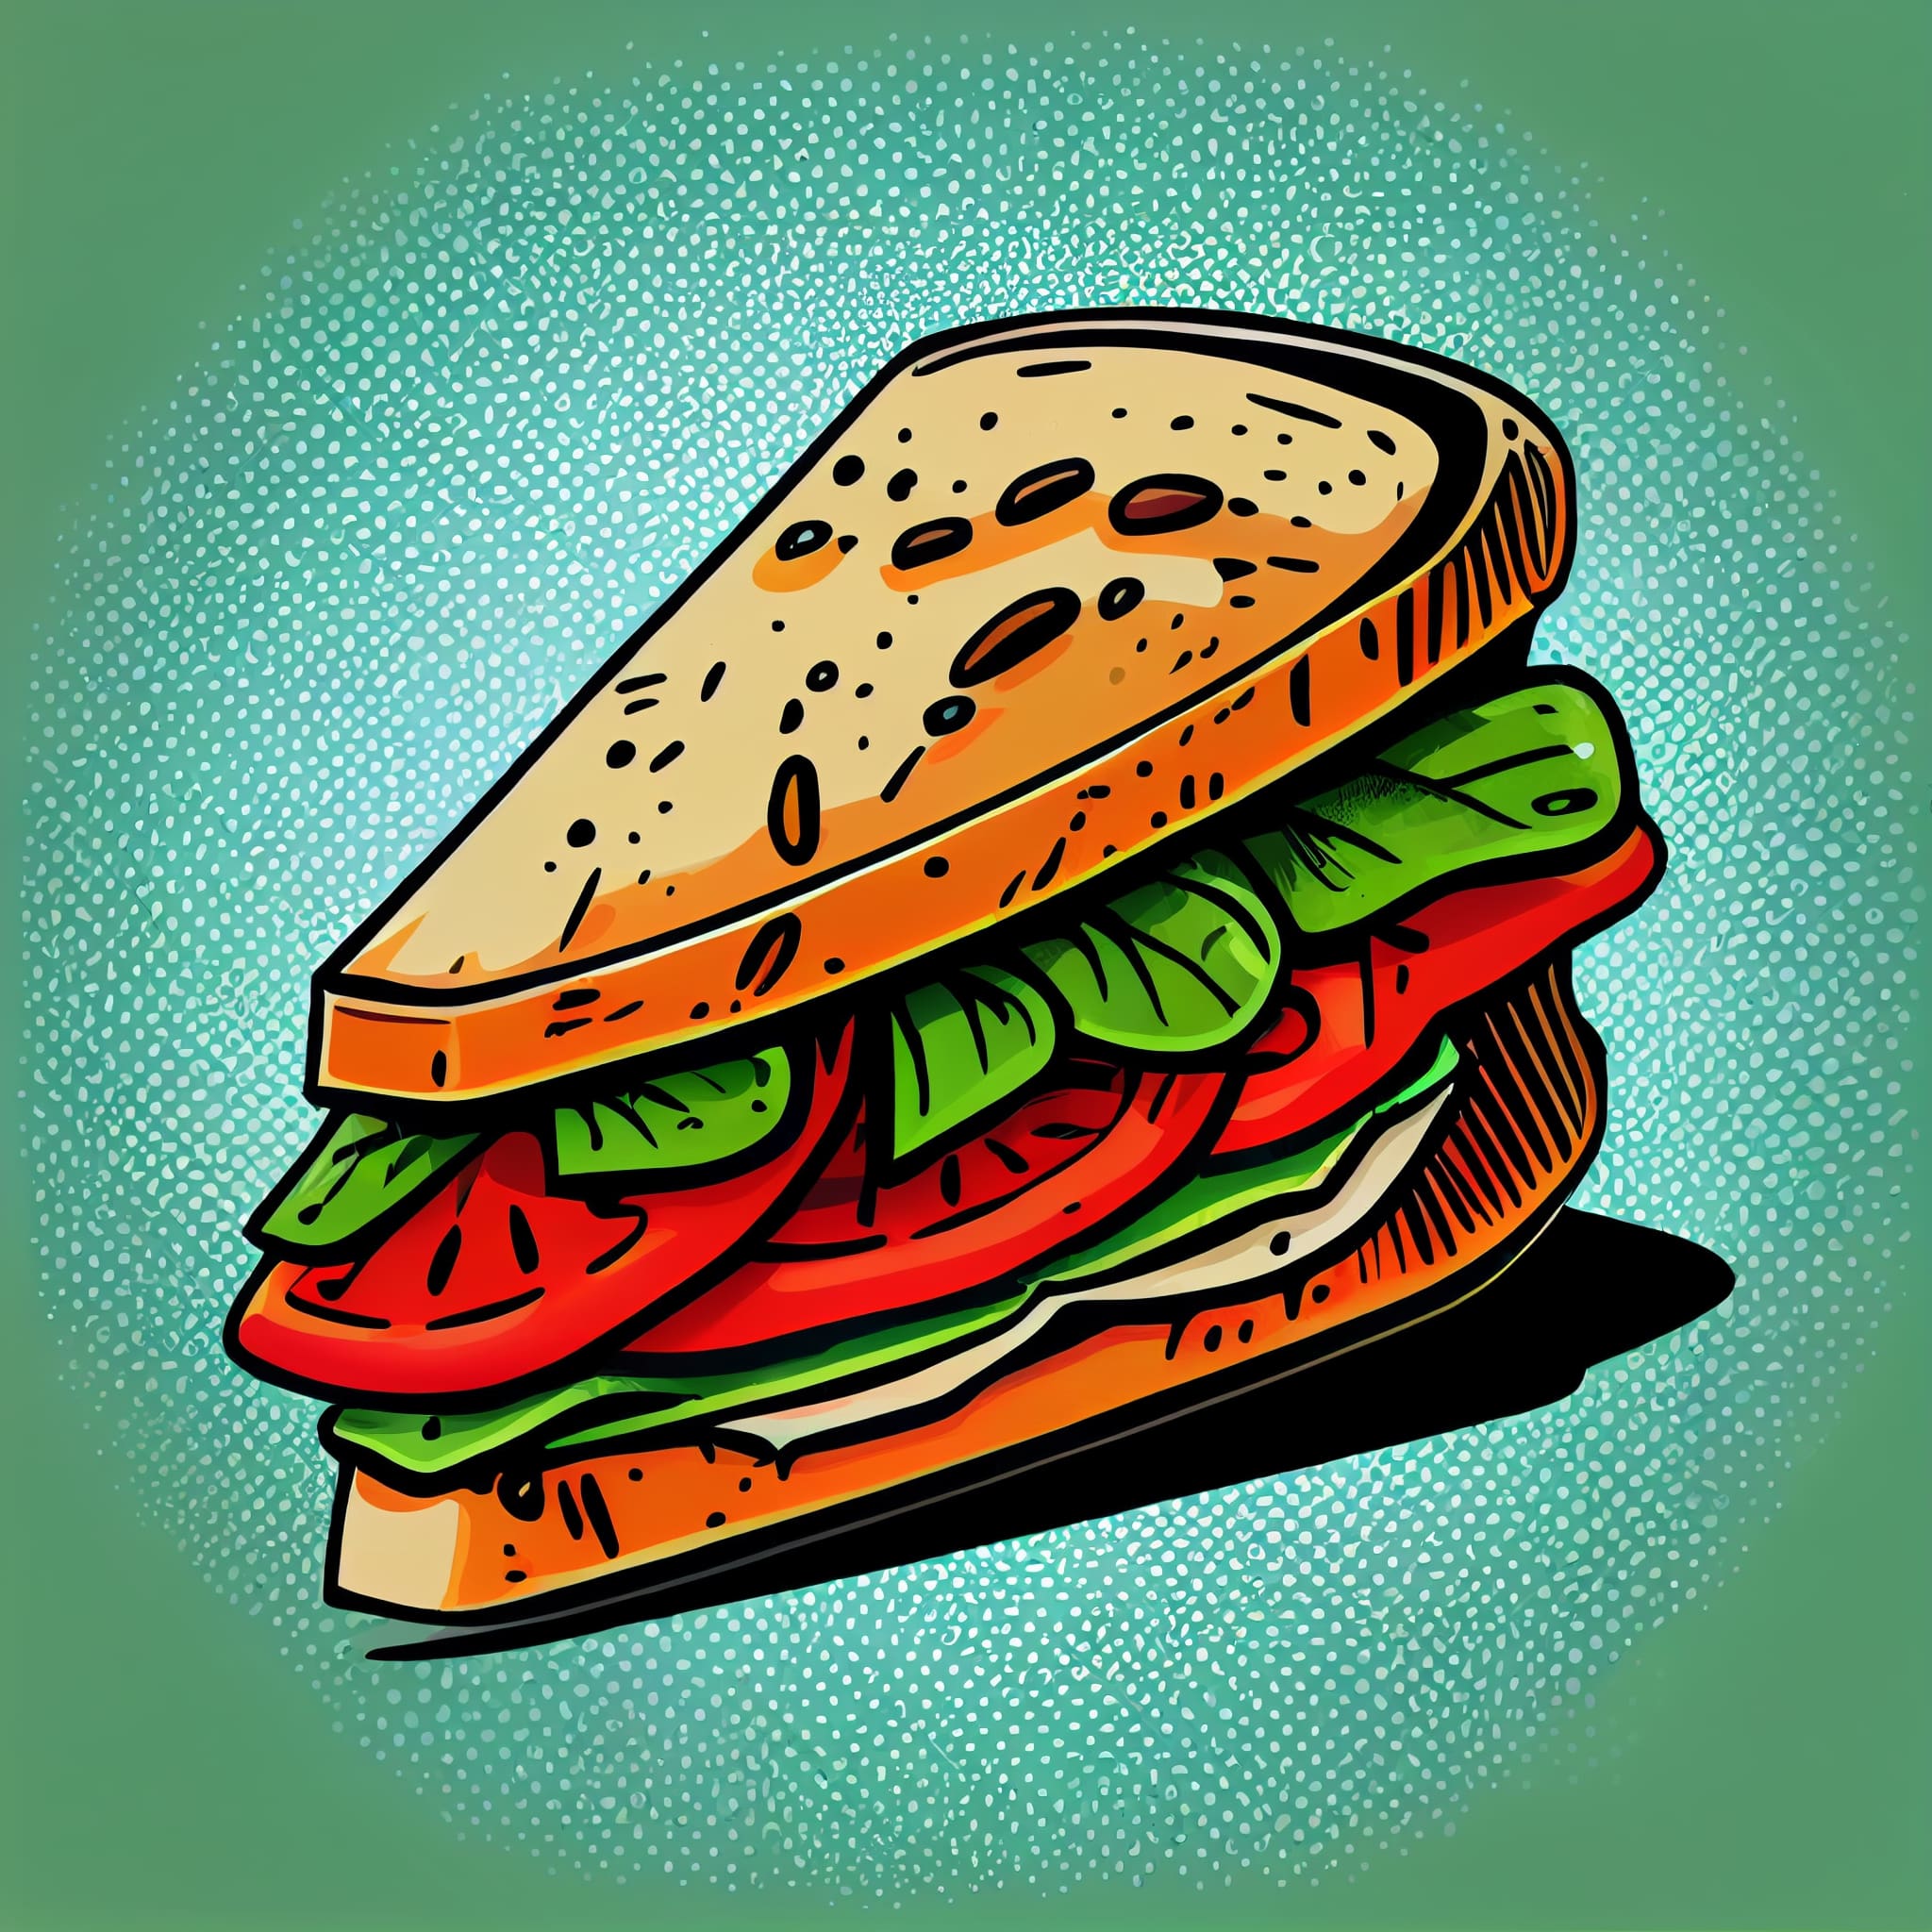 Drawing of a sandwich with lettuce and tomato slices.